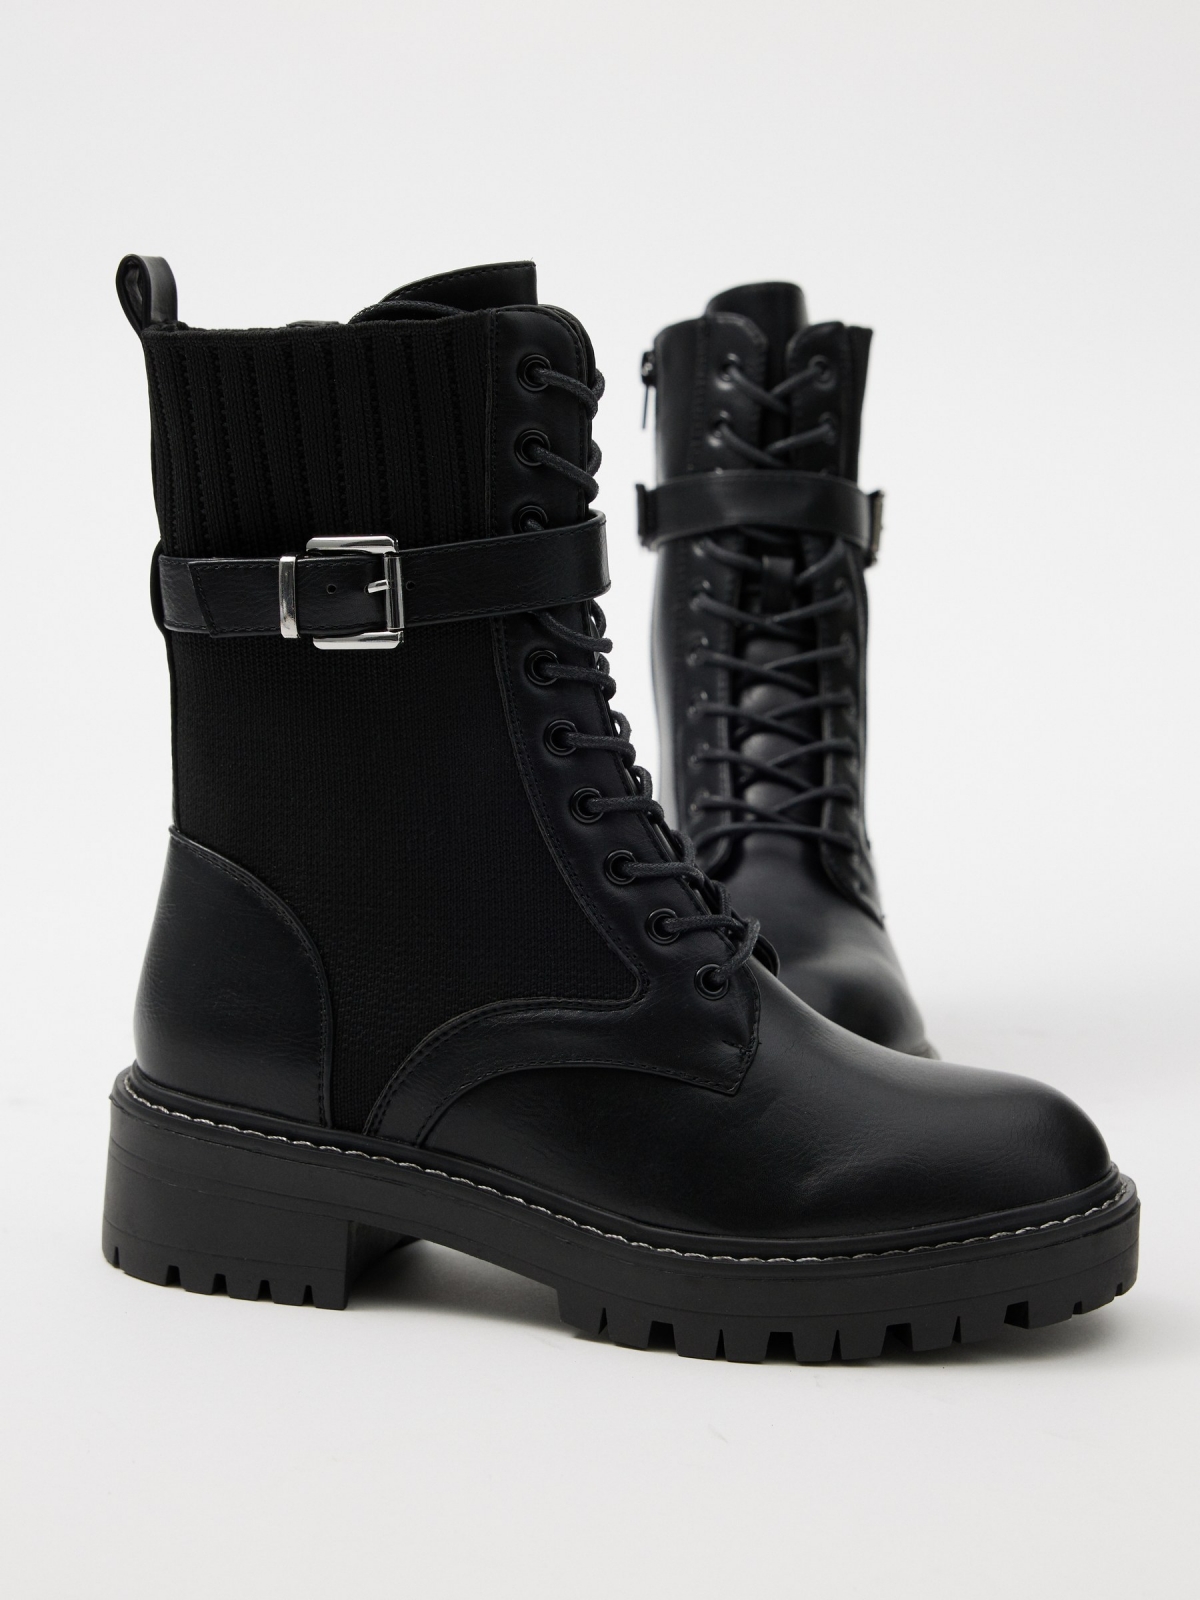 Combined buckle ankle boot black detail view